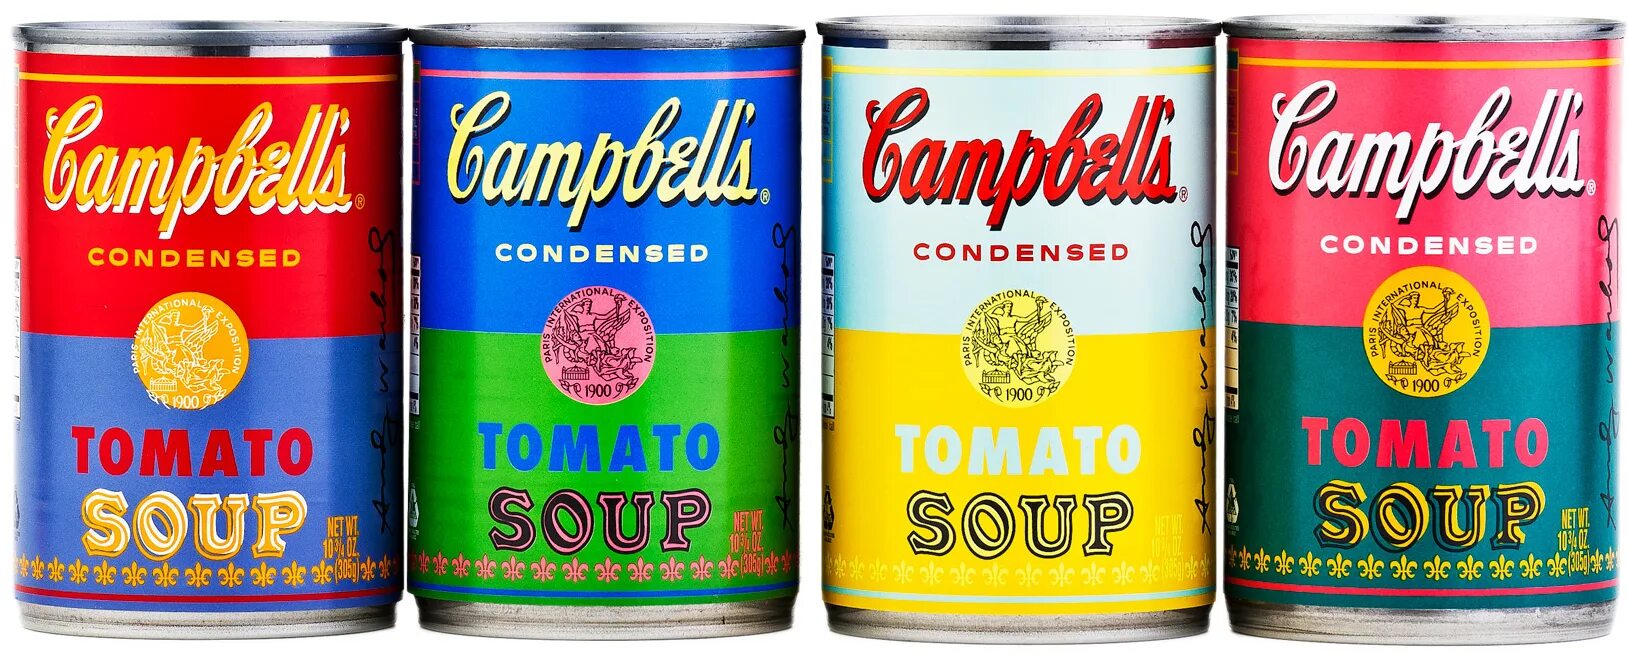 Soup cans. Энди Уорхол Campbell's Soup can оригинал. Tomato Soup Campbell Andy Warhol. Andy Warhol Campbell. Энди Уорхол томатный суп.